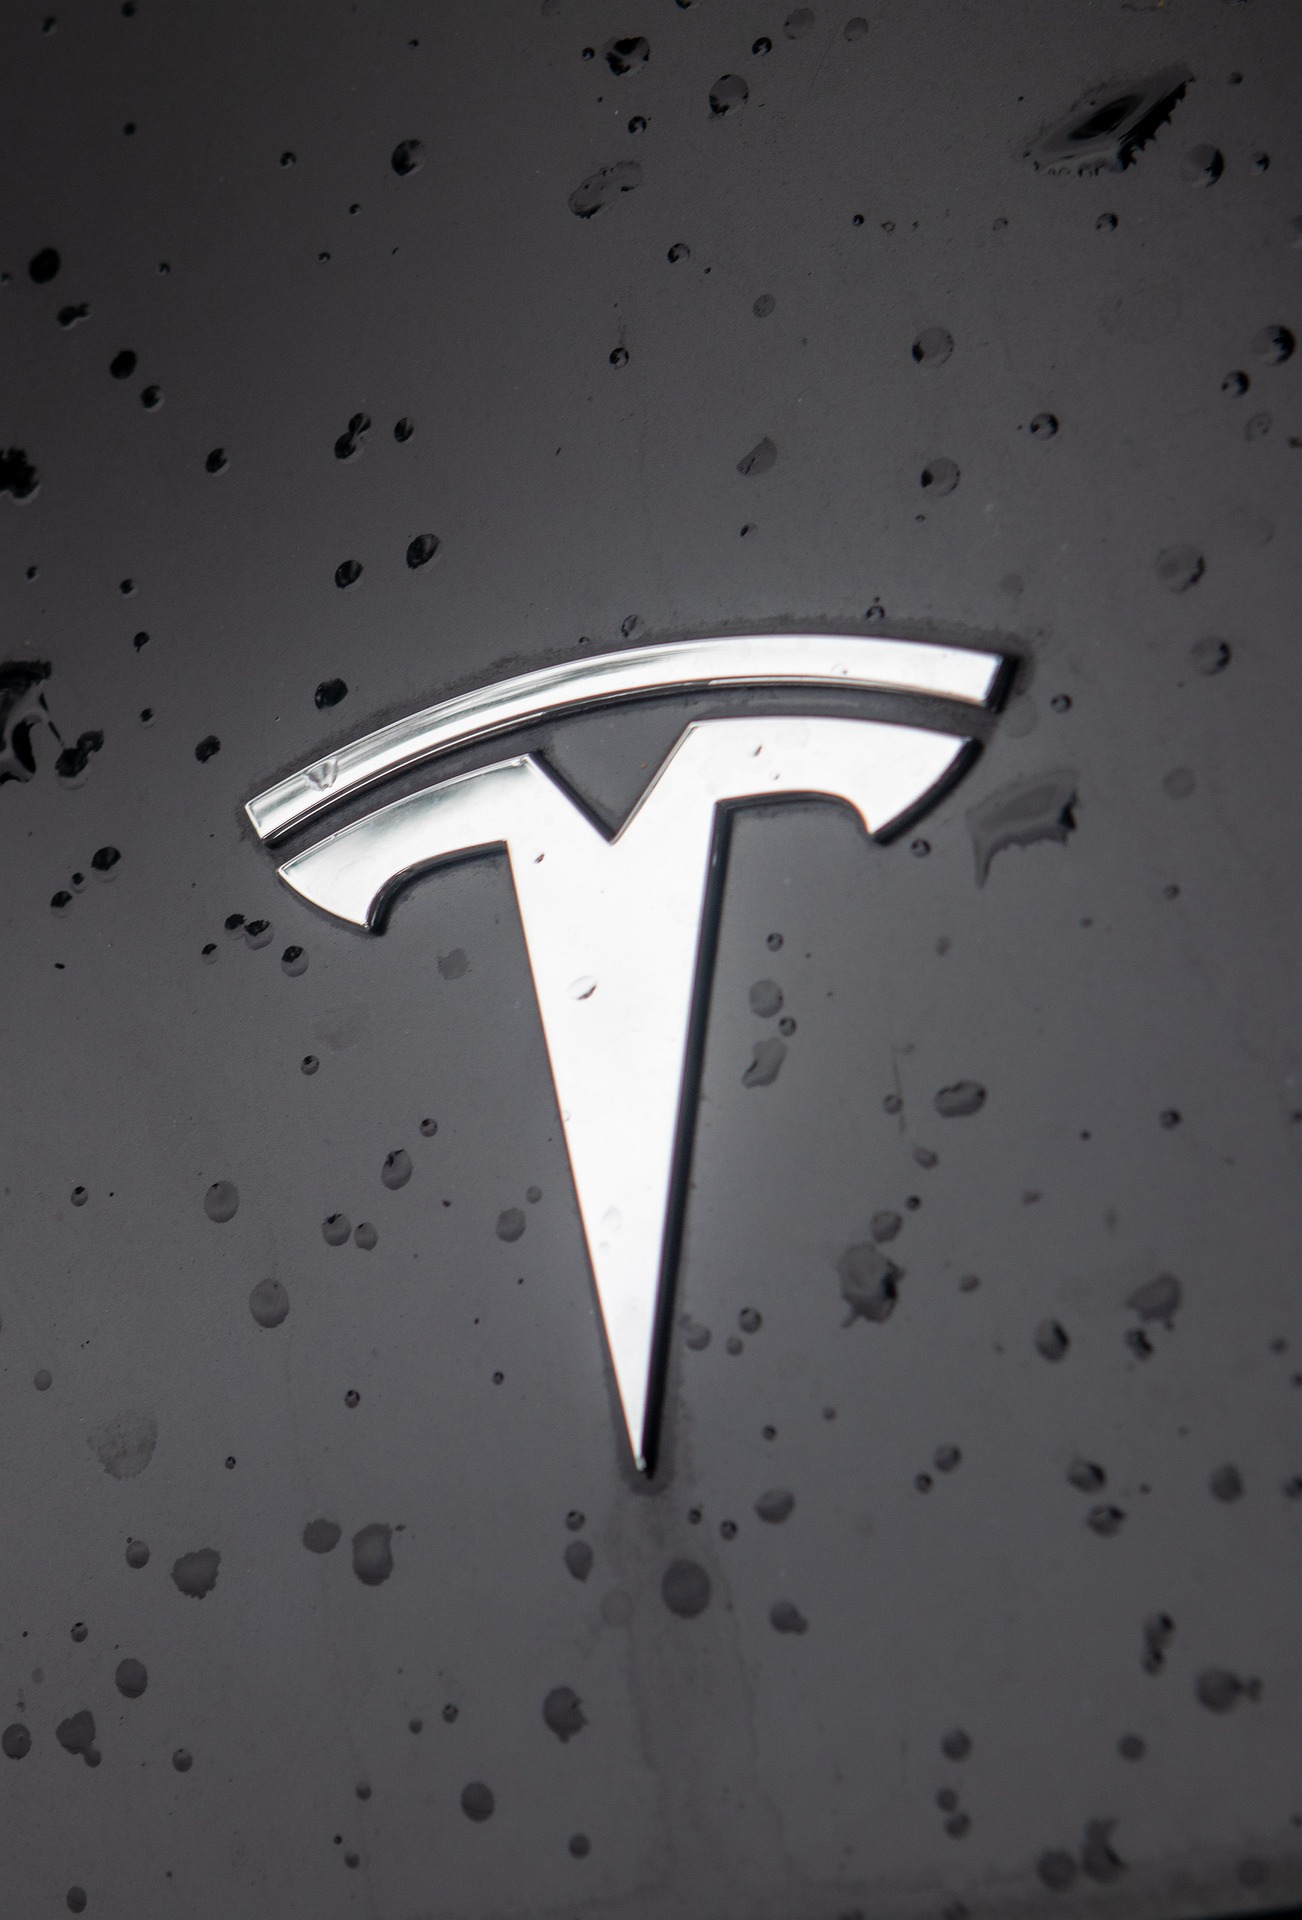 Tesla Models and Prices in the USA